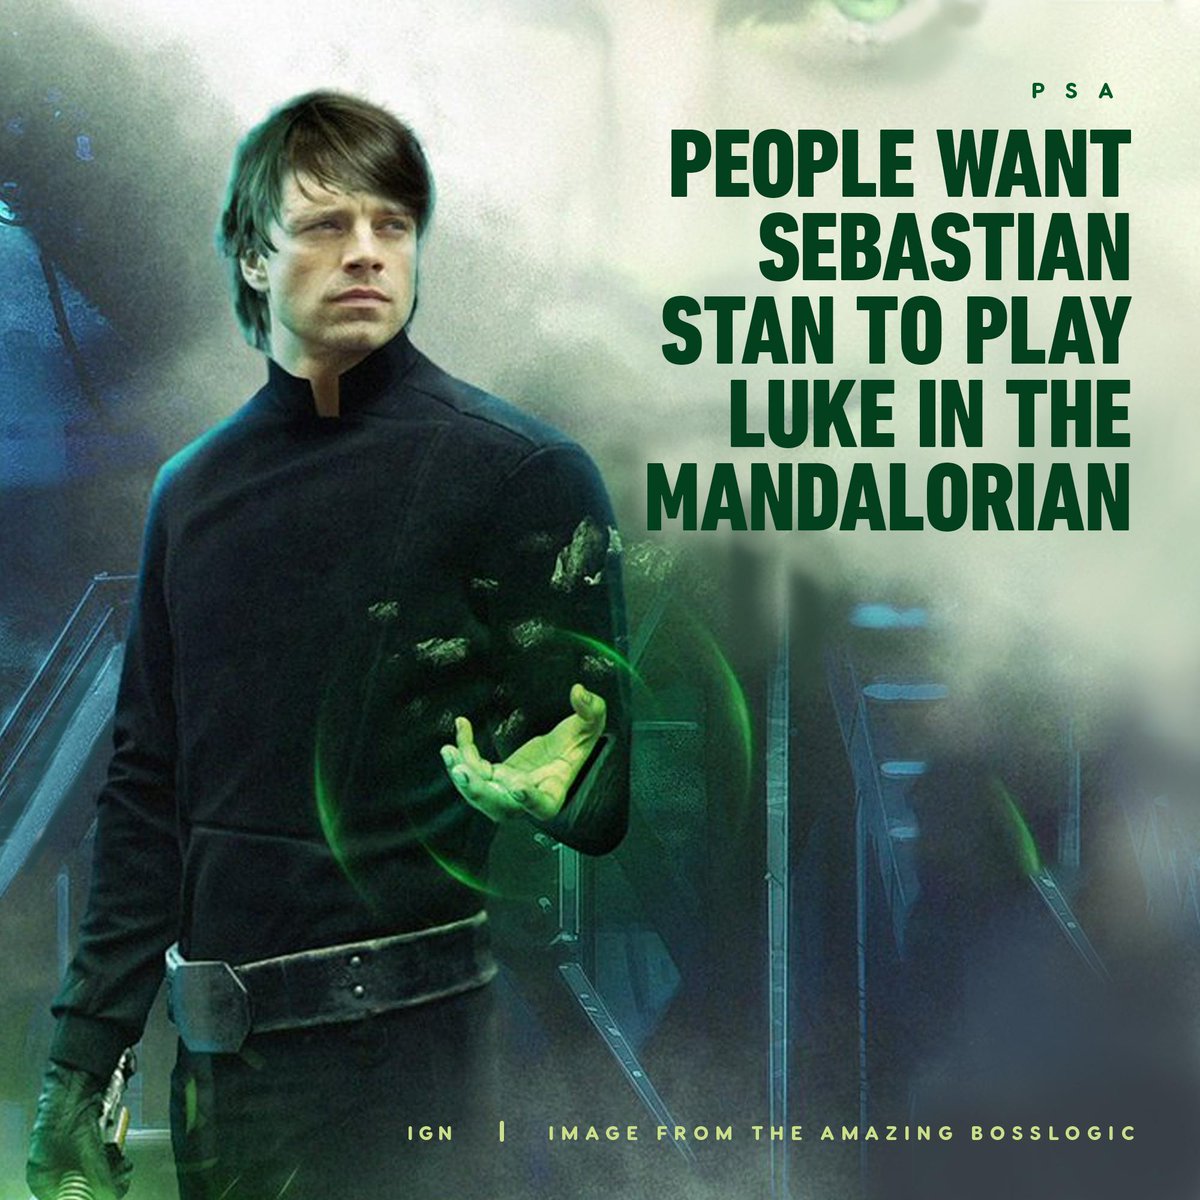 Ign On Twitter Artist Bosslogic Imagines What Sebastian Stan Would Look Like As A Young Luke Skywalker In The Mandalorian Thoughts Https T Co Xetxdx5dq4